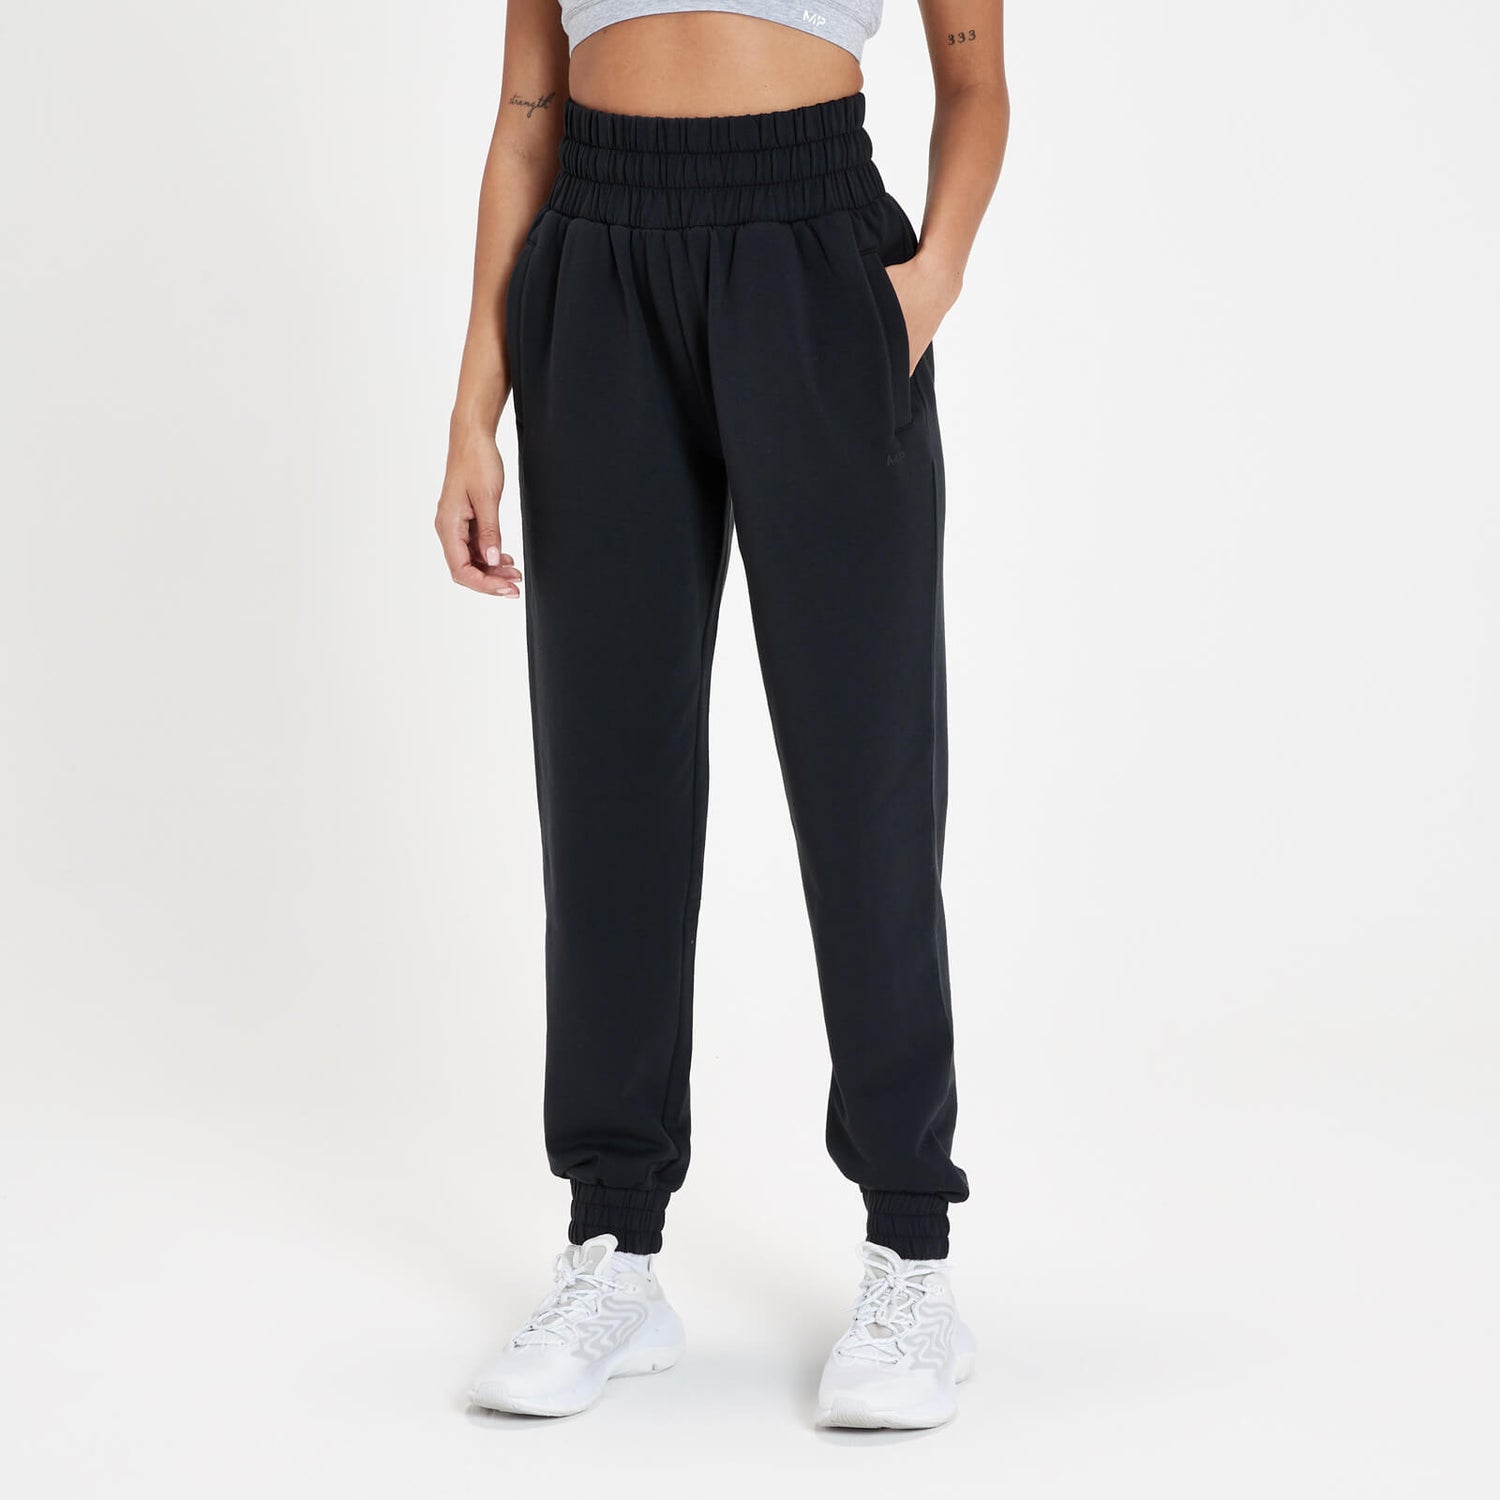 MP Women's Engage Joggers - Black - S